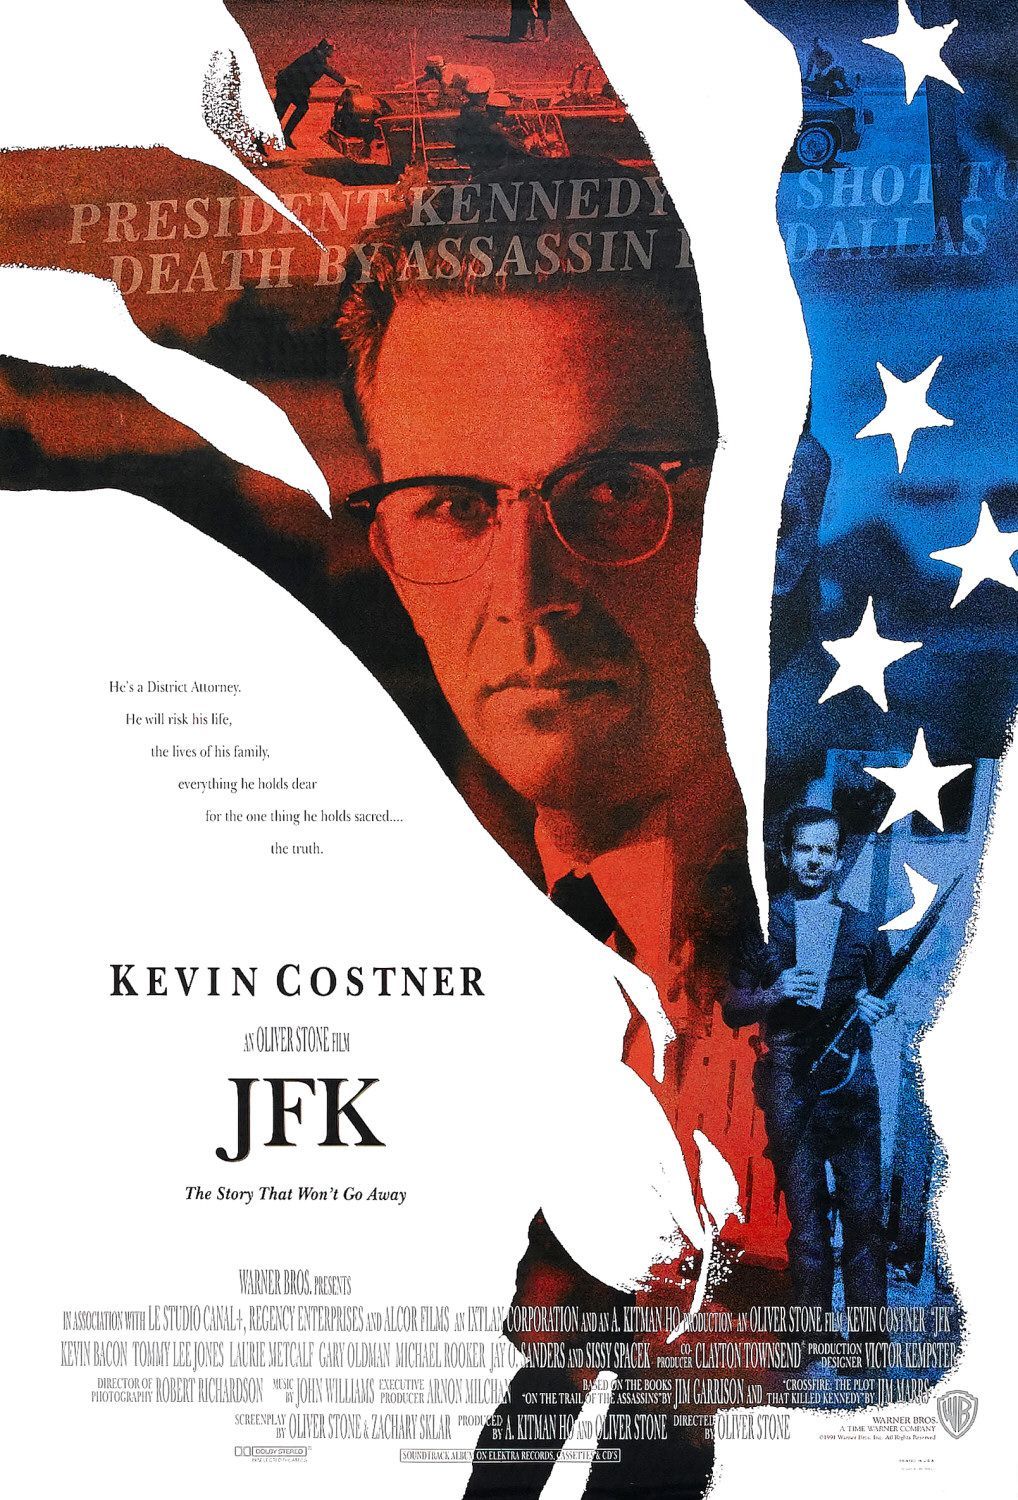 Poster for the 1991 movie JFK.